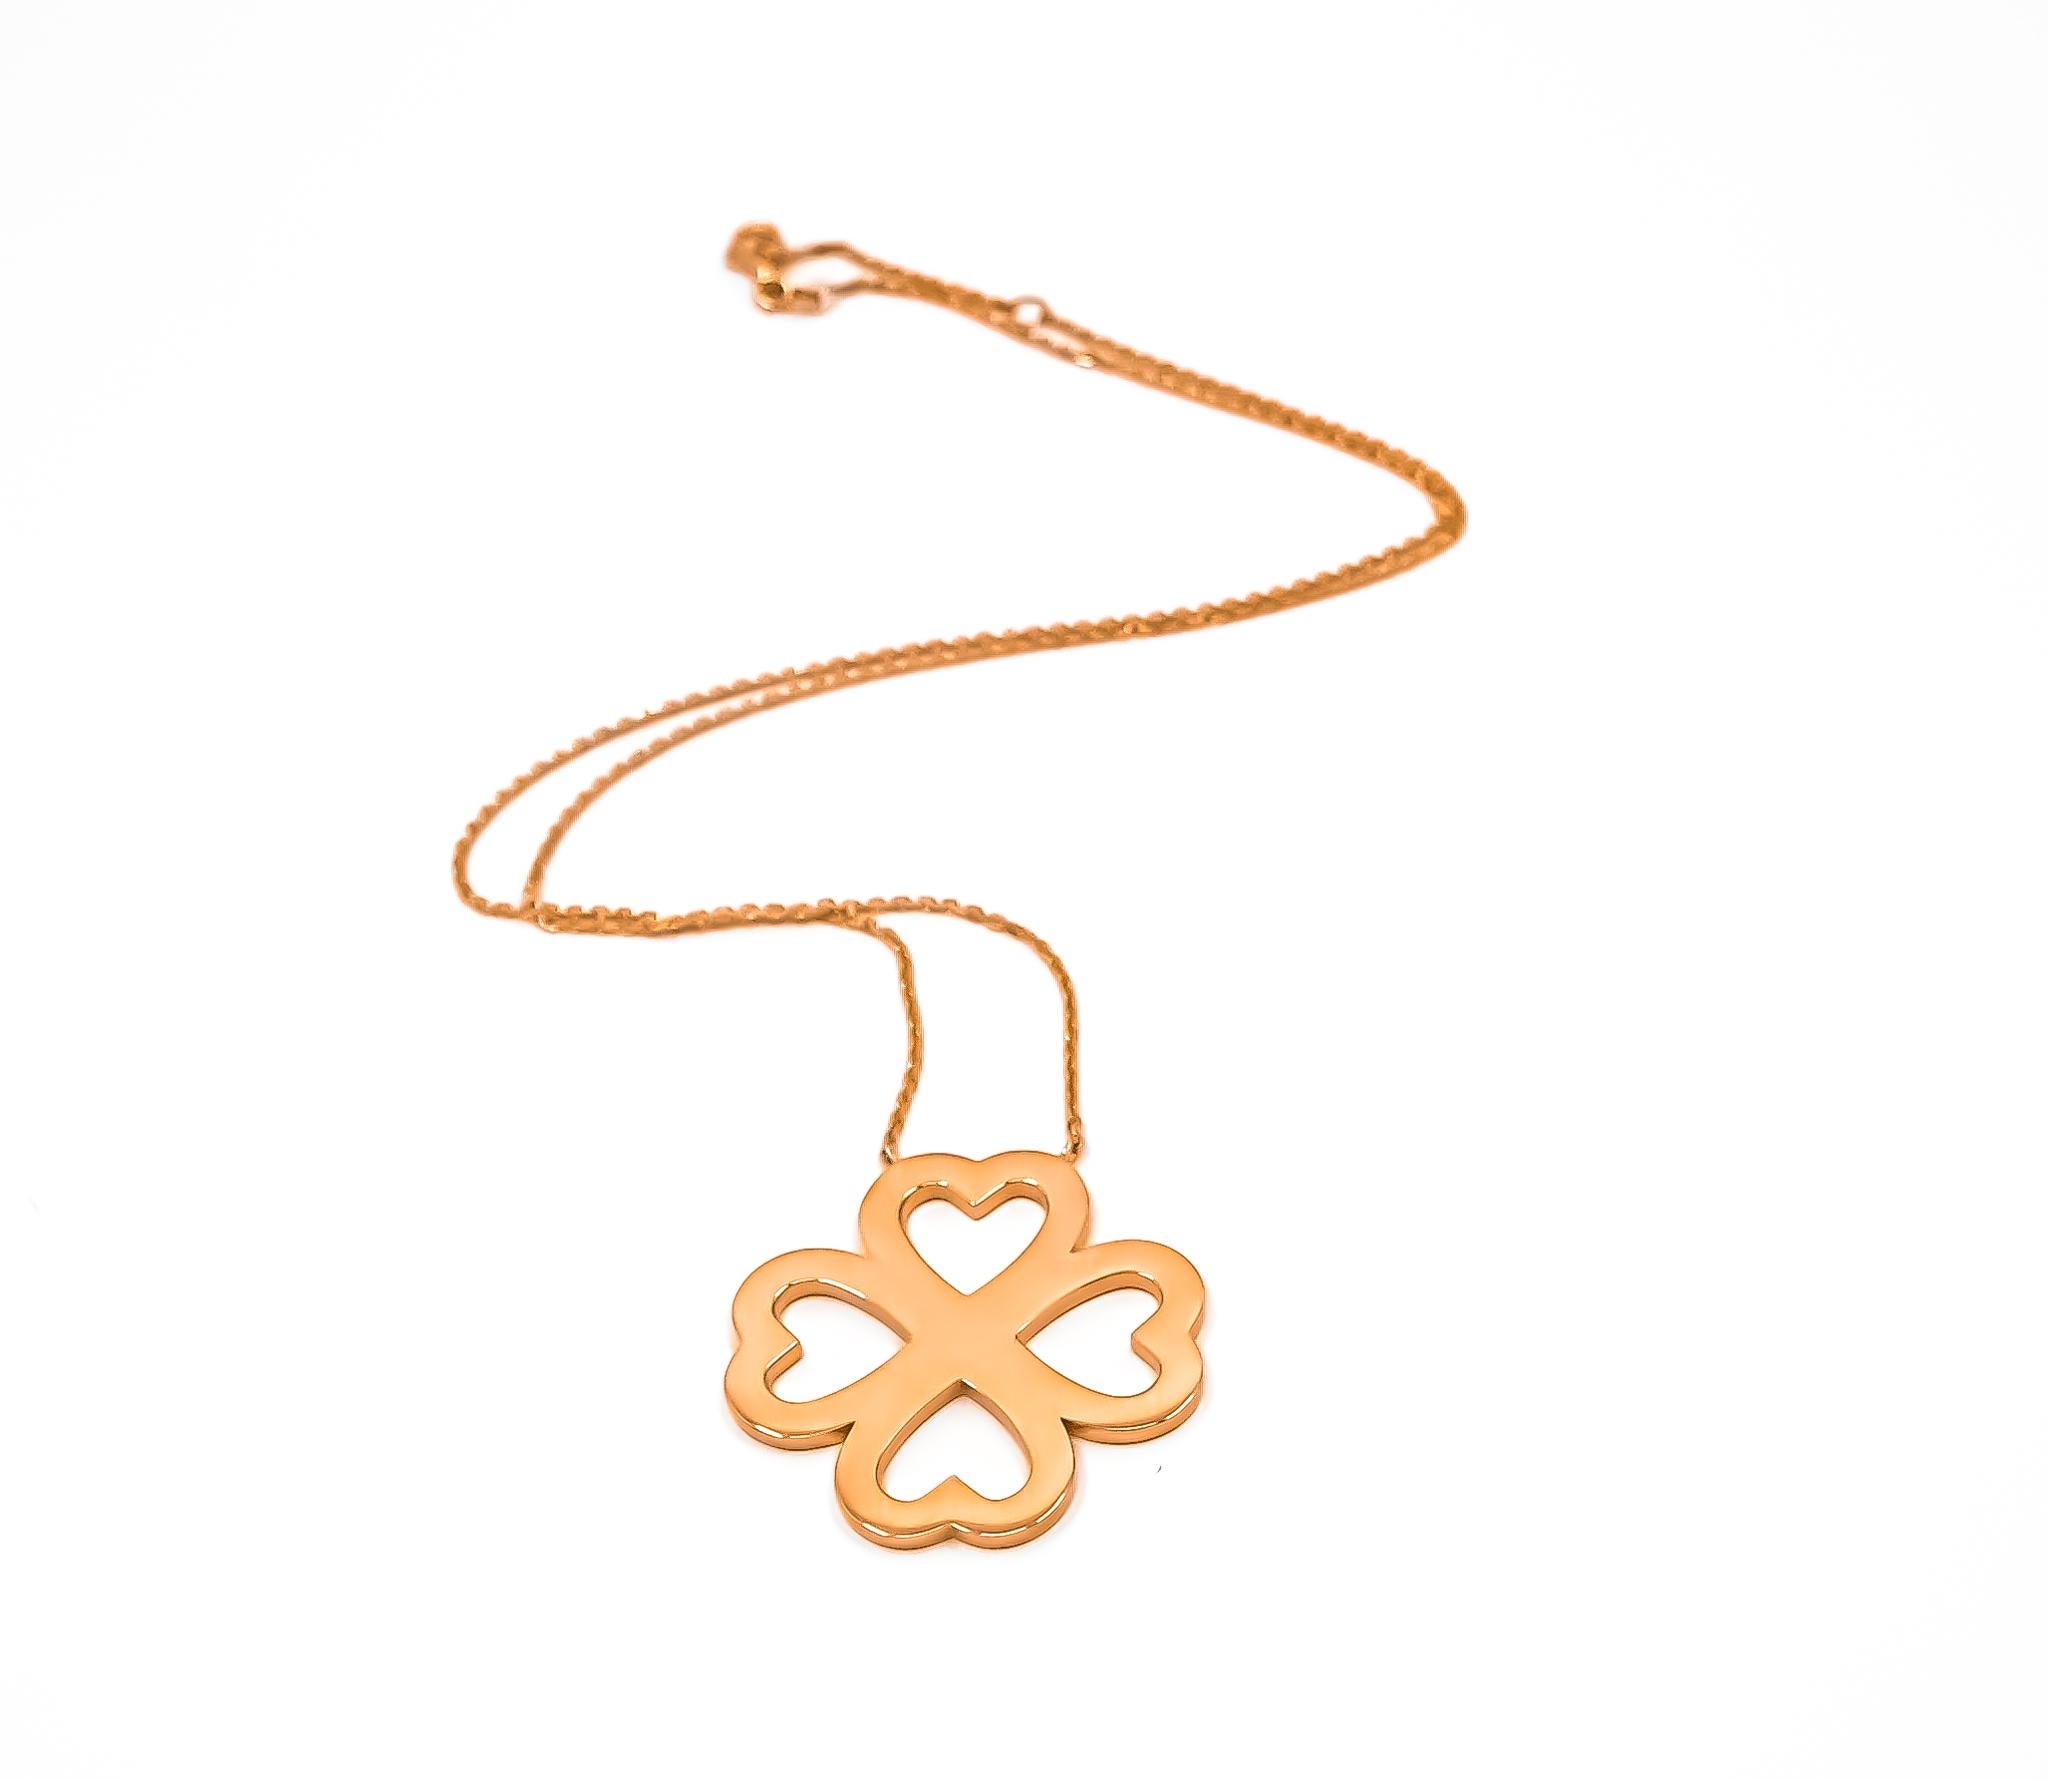 Heart Blossom Pendant Necklace in 18kt Rose Gold In New Condition For Sale In Dubai, AE